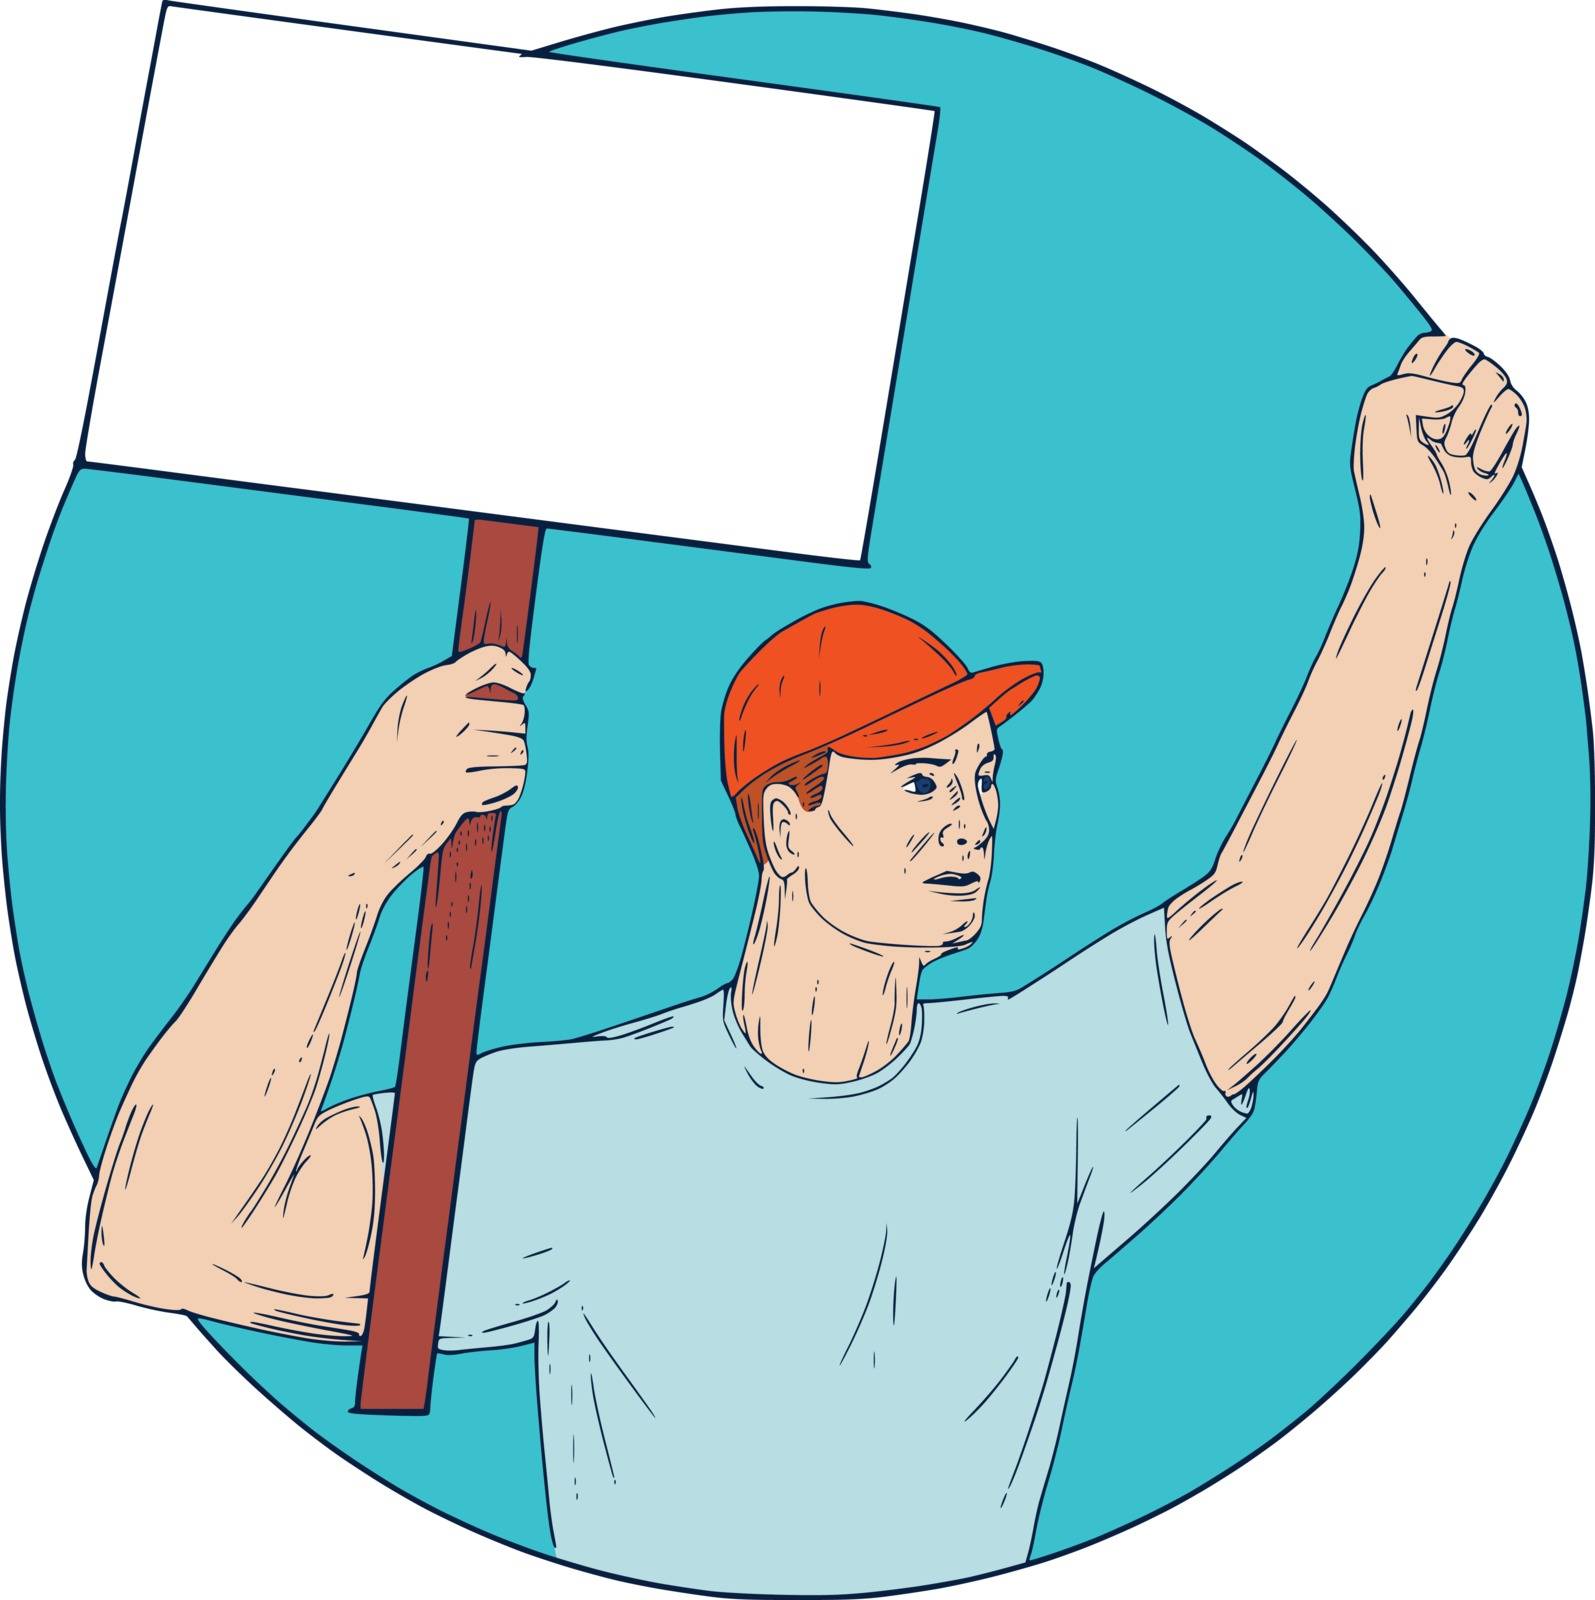 Drawing sketch style illustration of a unionl worker protester activist unionist  protesting striking with fist up holding up a placard sign looking to the side set inside circle on isolated background. 